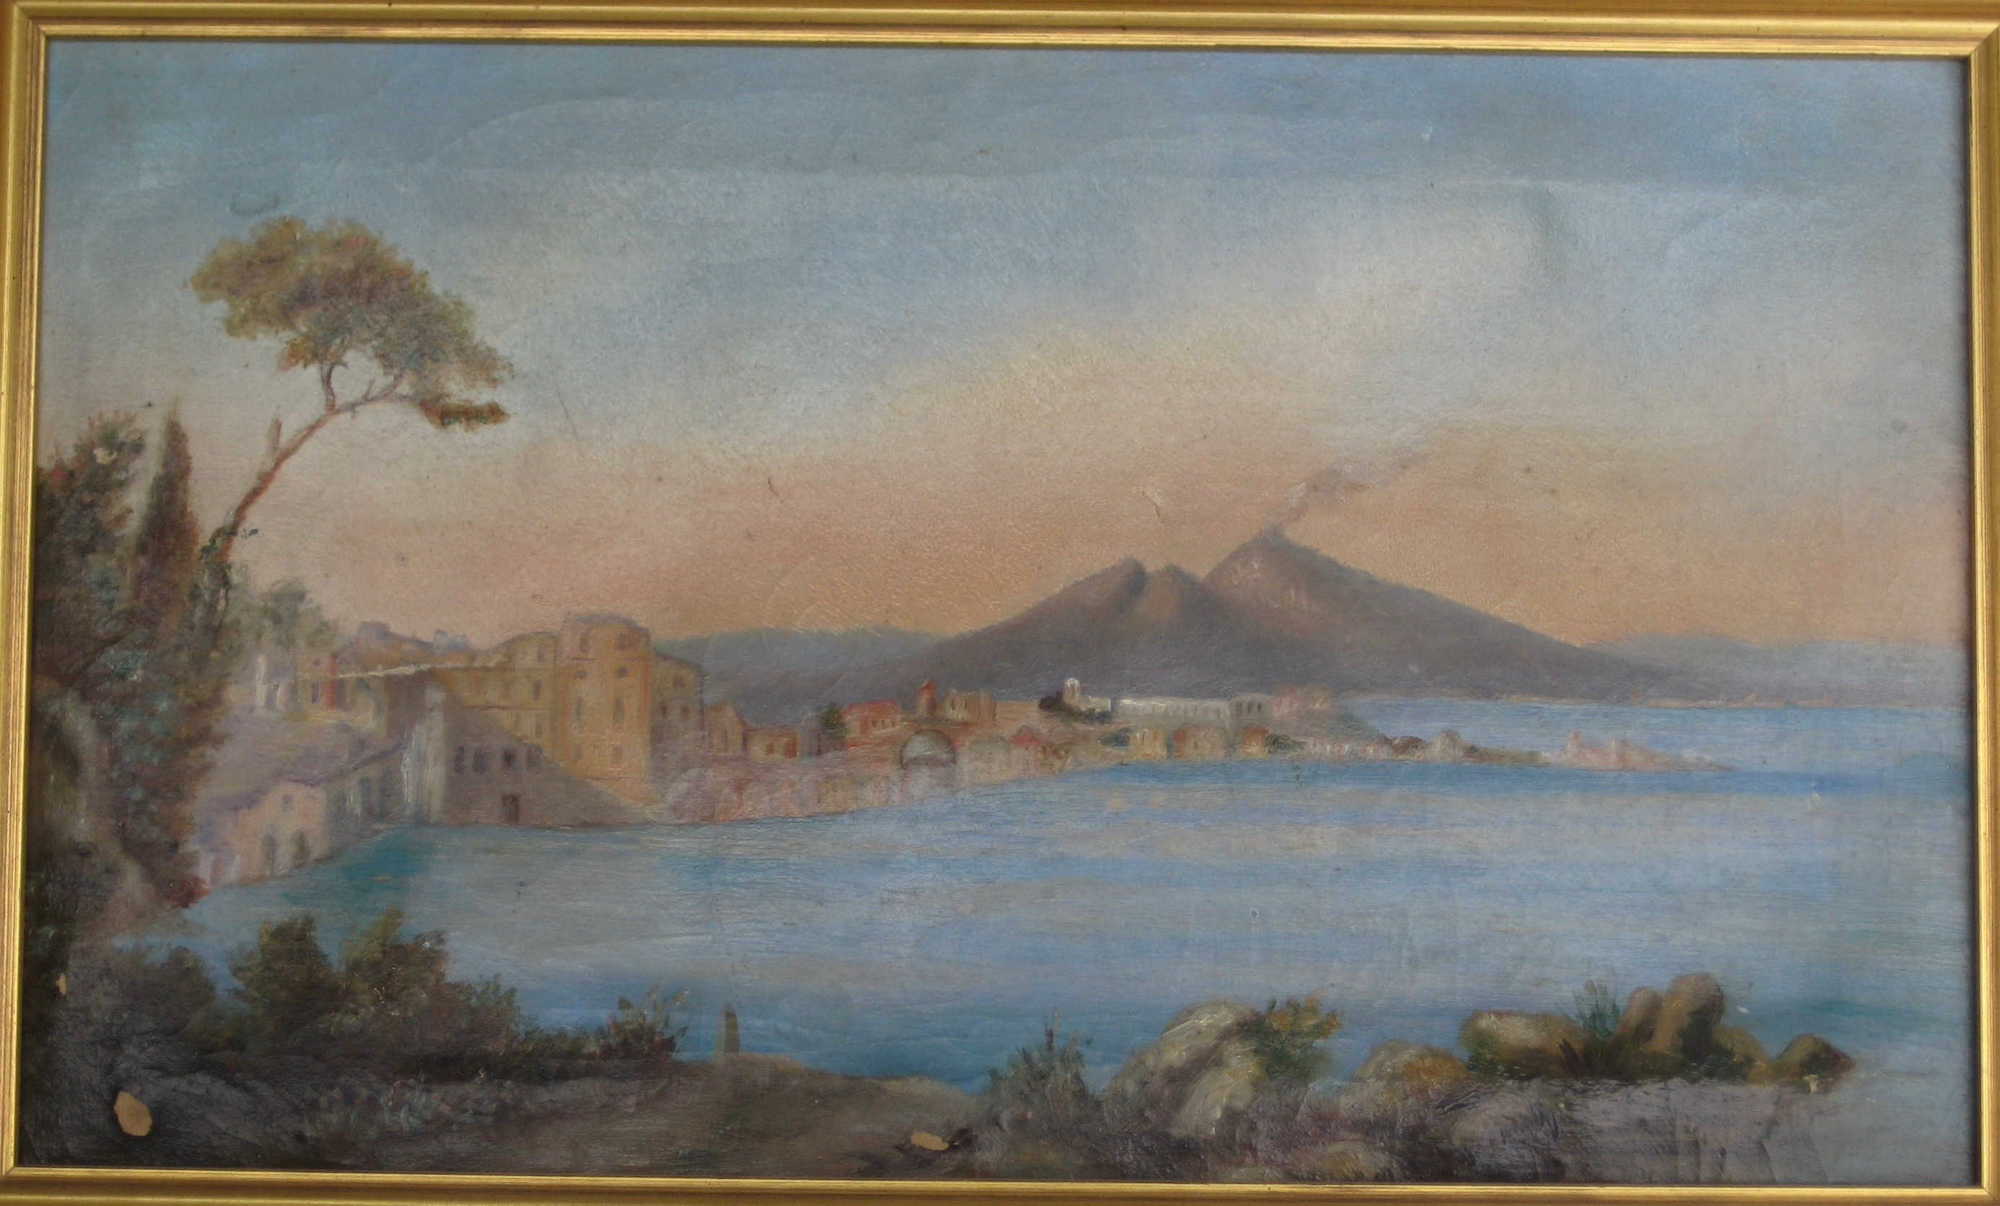 A painting of Vesuvius and the Bay of Naples by great grandmother Emma Layley in 1886.